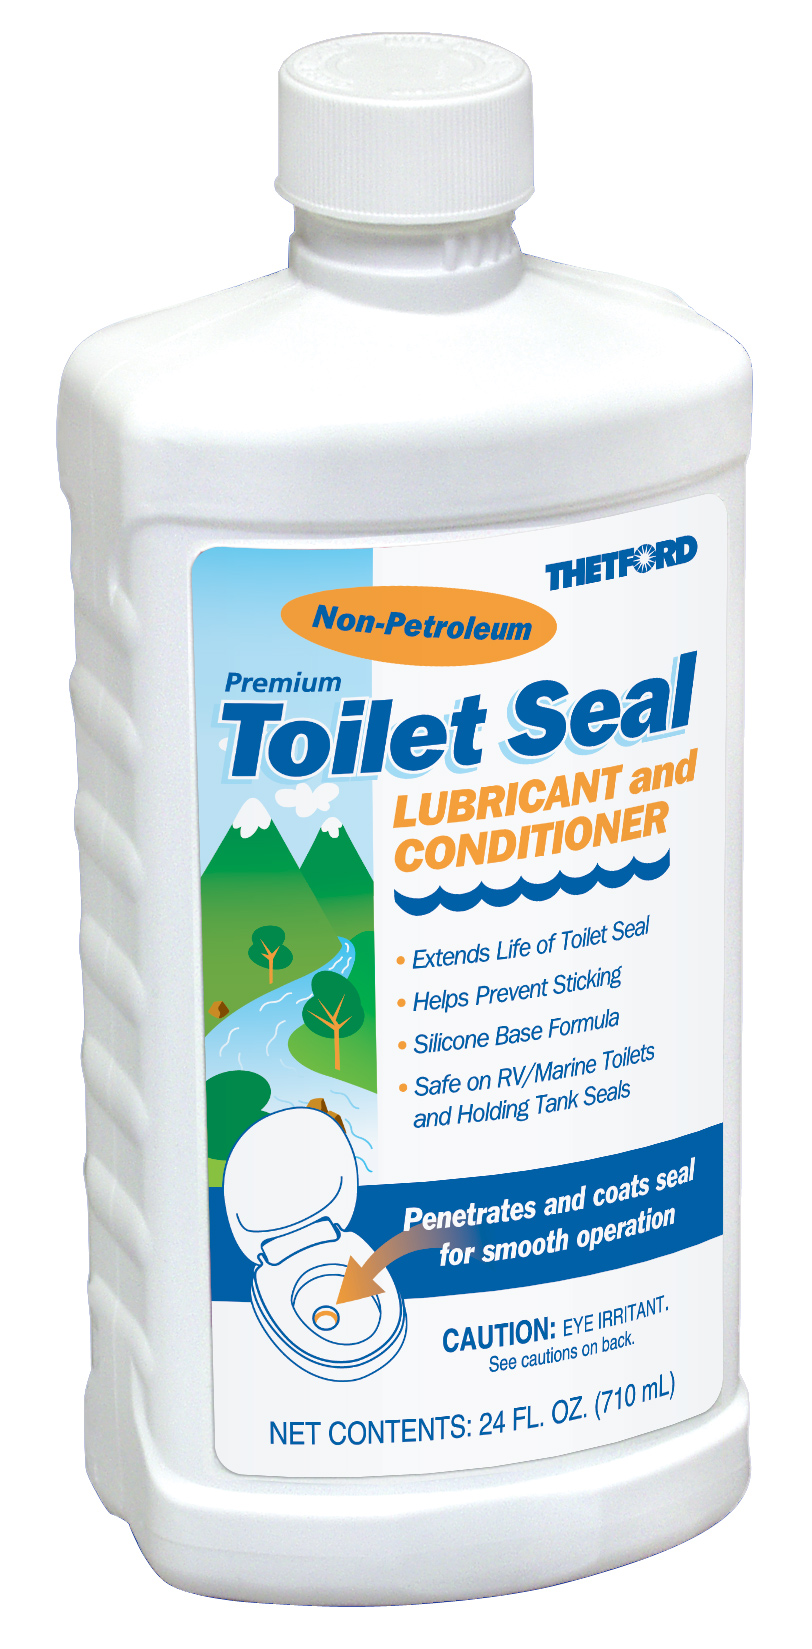 Toilet Seal Lubricant and Conditioner  Permanent and portable toilets seal  lubricant